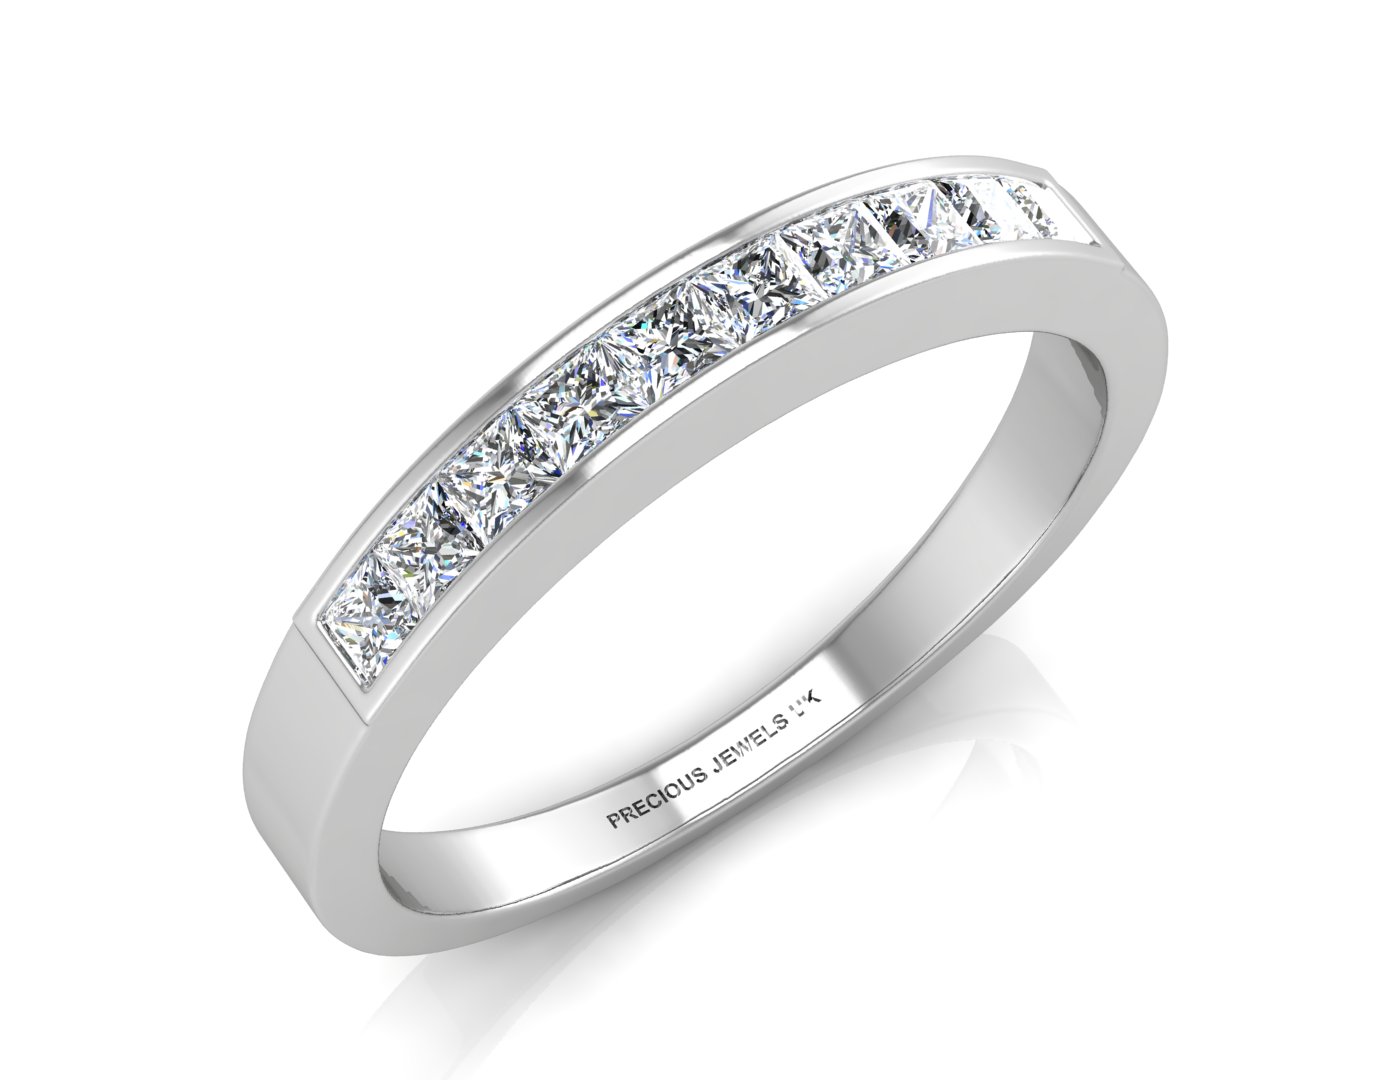 9ct White Gold Channel Set Half Eternity Diamond Ring 0.50 Carats - Image 3 of 6